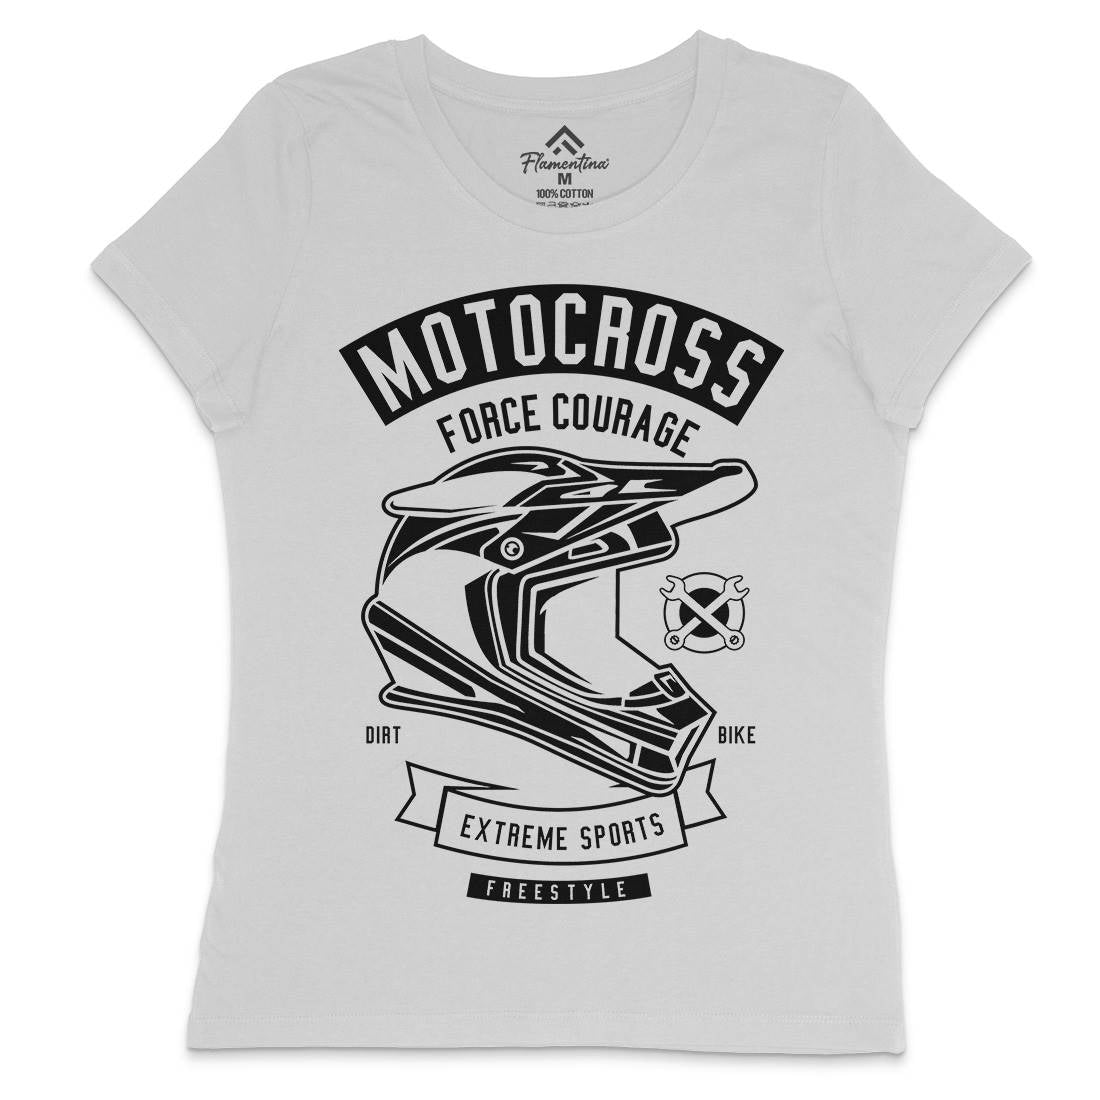 Motocross Force Courage Womens Crew Neck T-Shirt Motorcycles B576